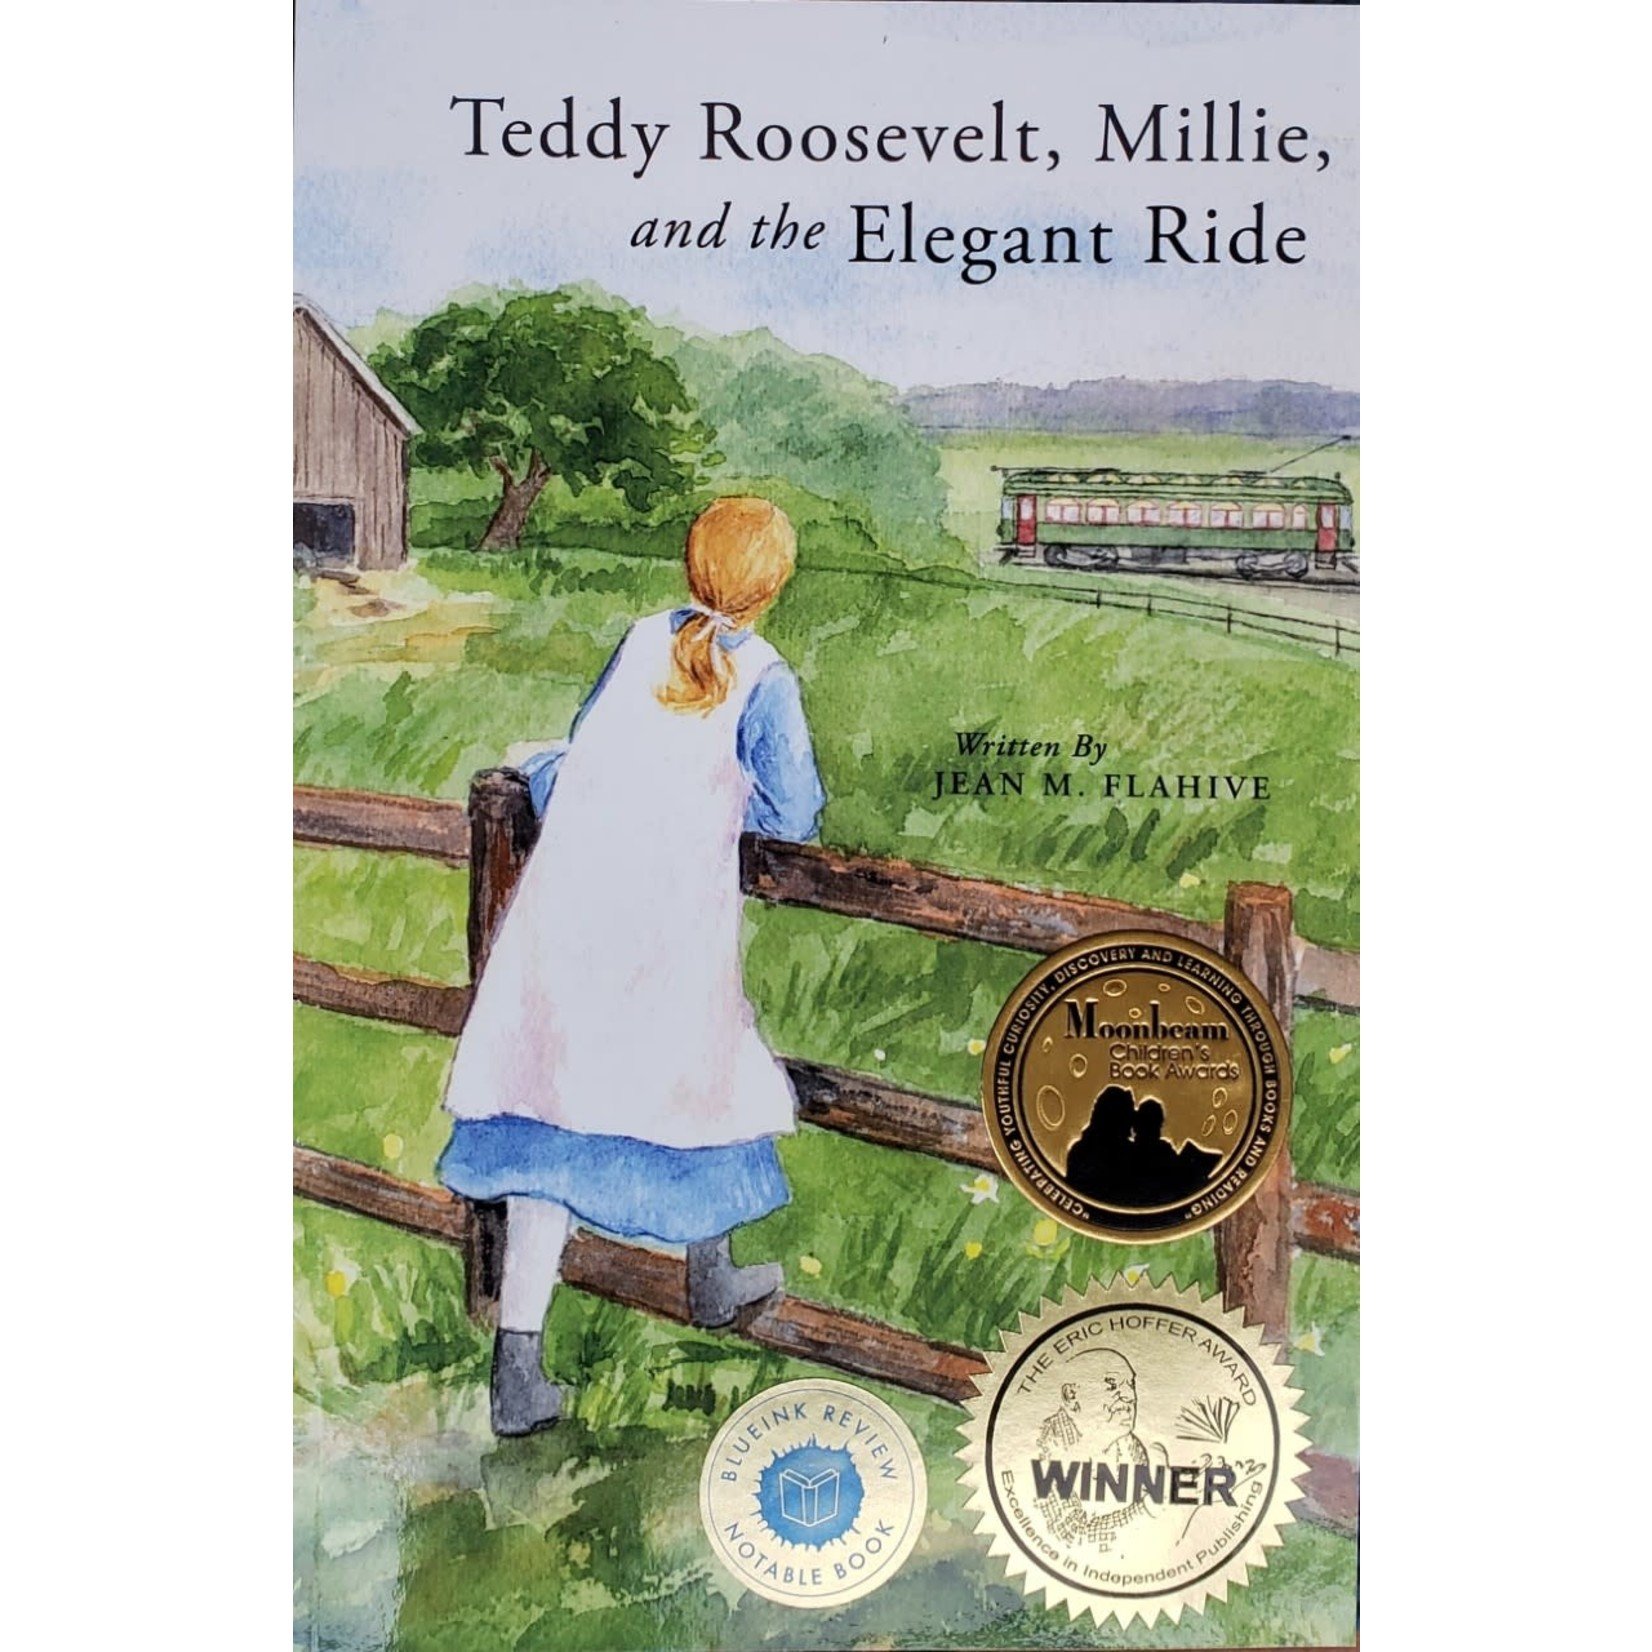 Teddy Roosevelt, Millie, and the Elegant Ride